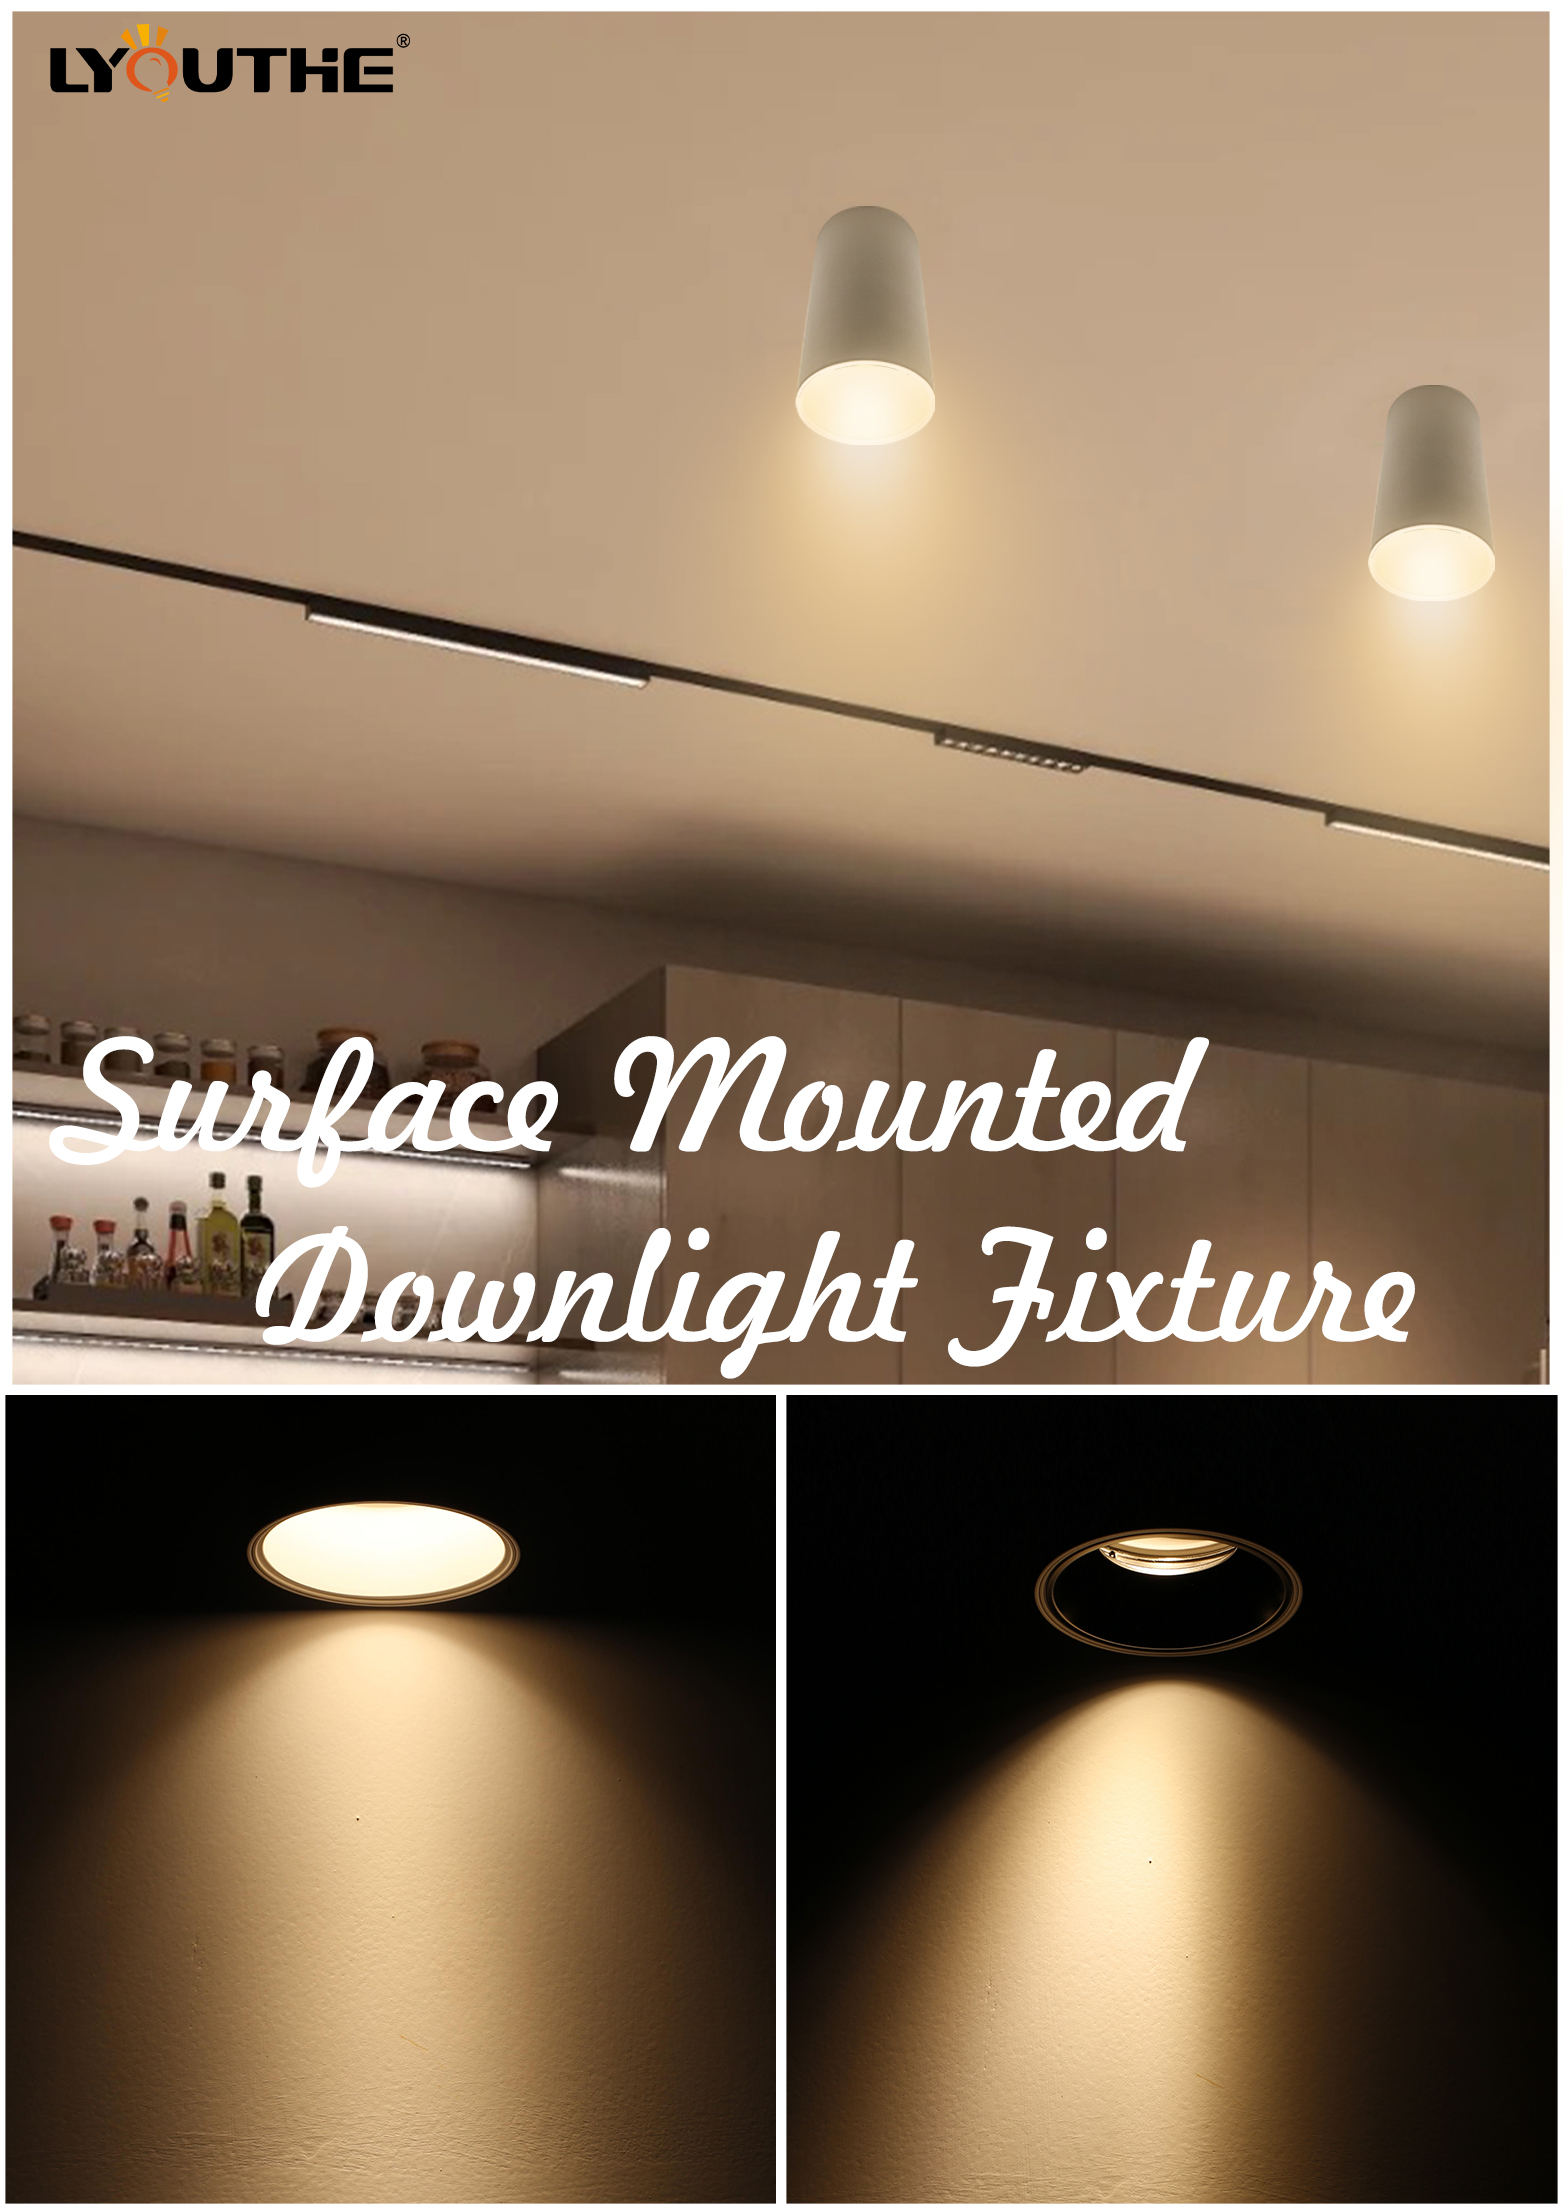 Features and functions of downlights